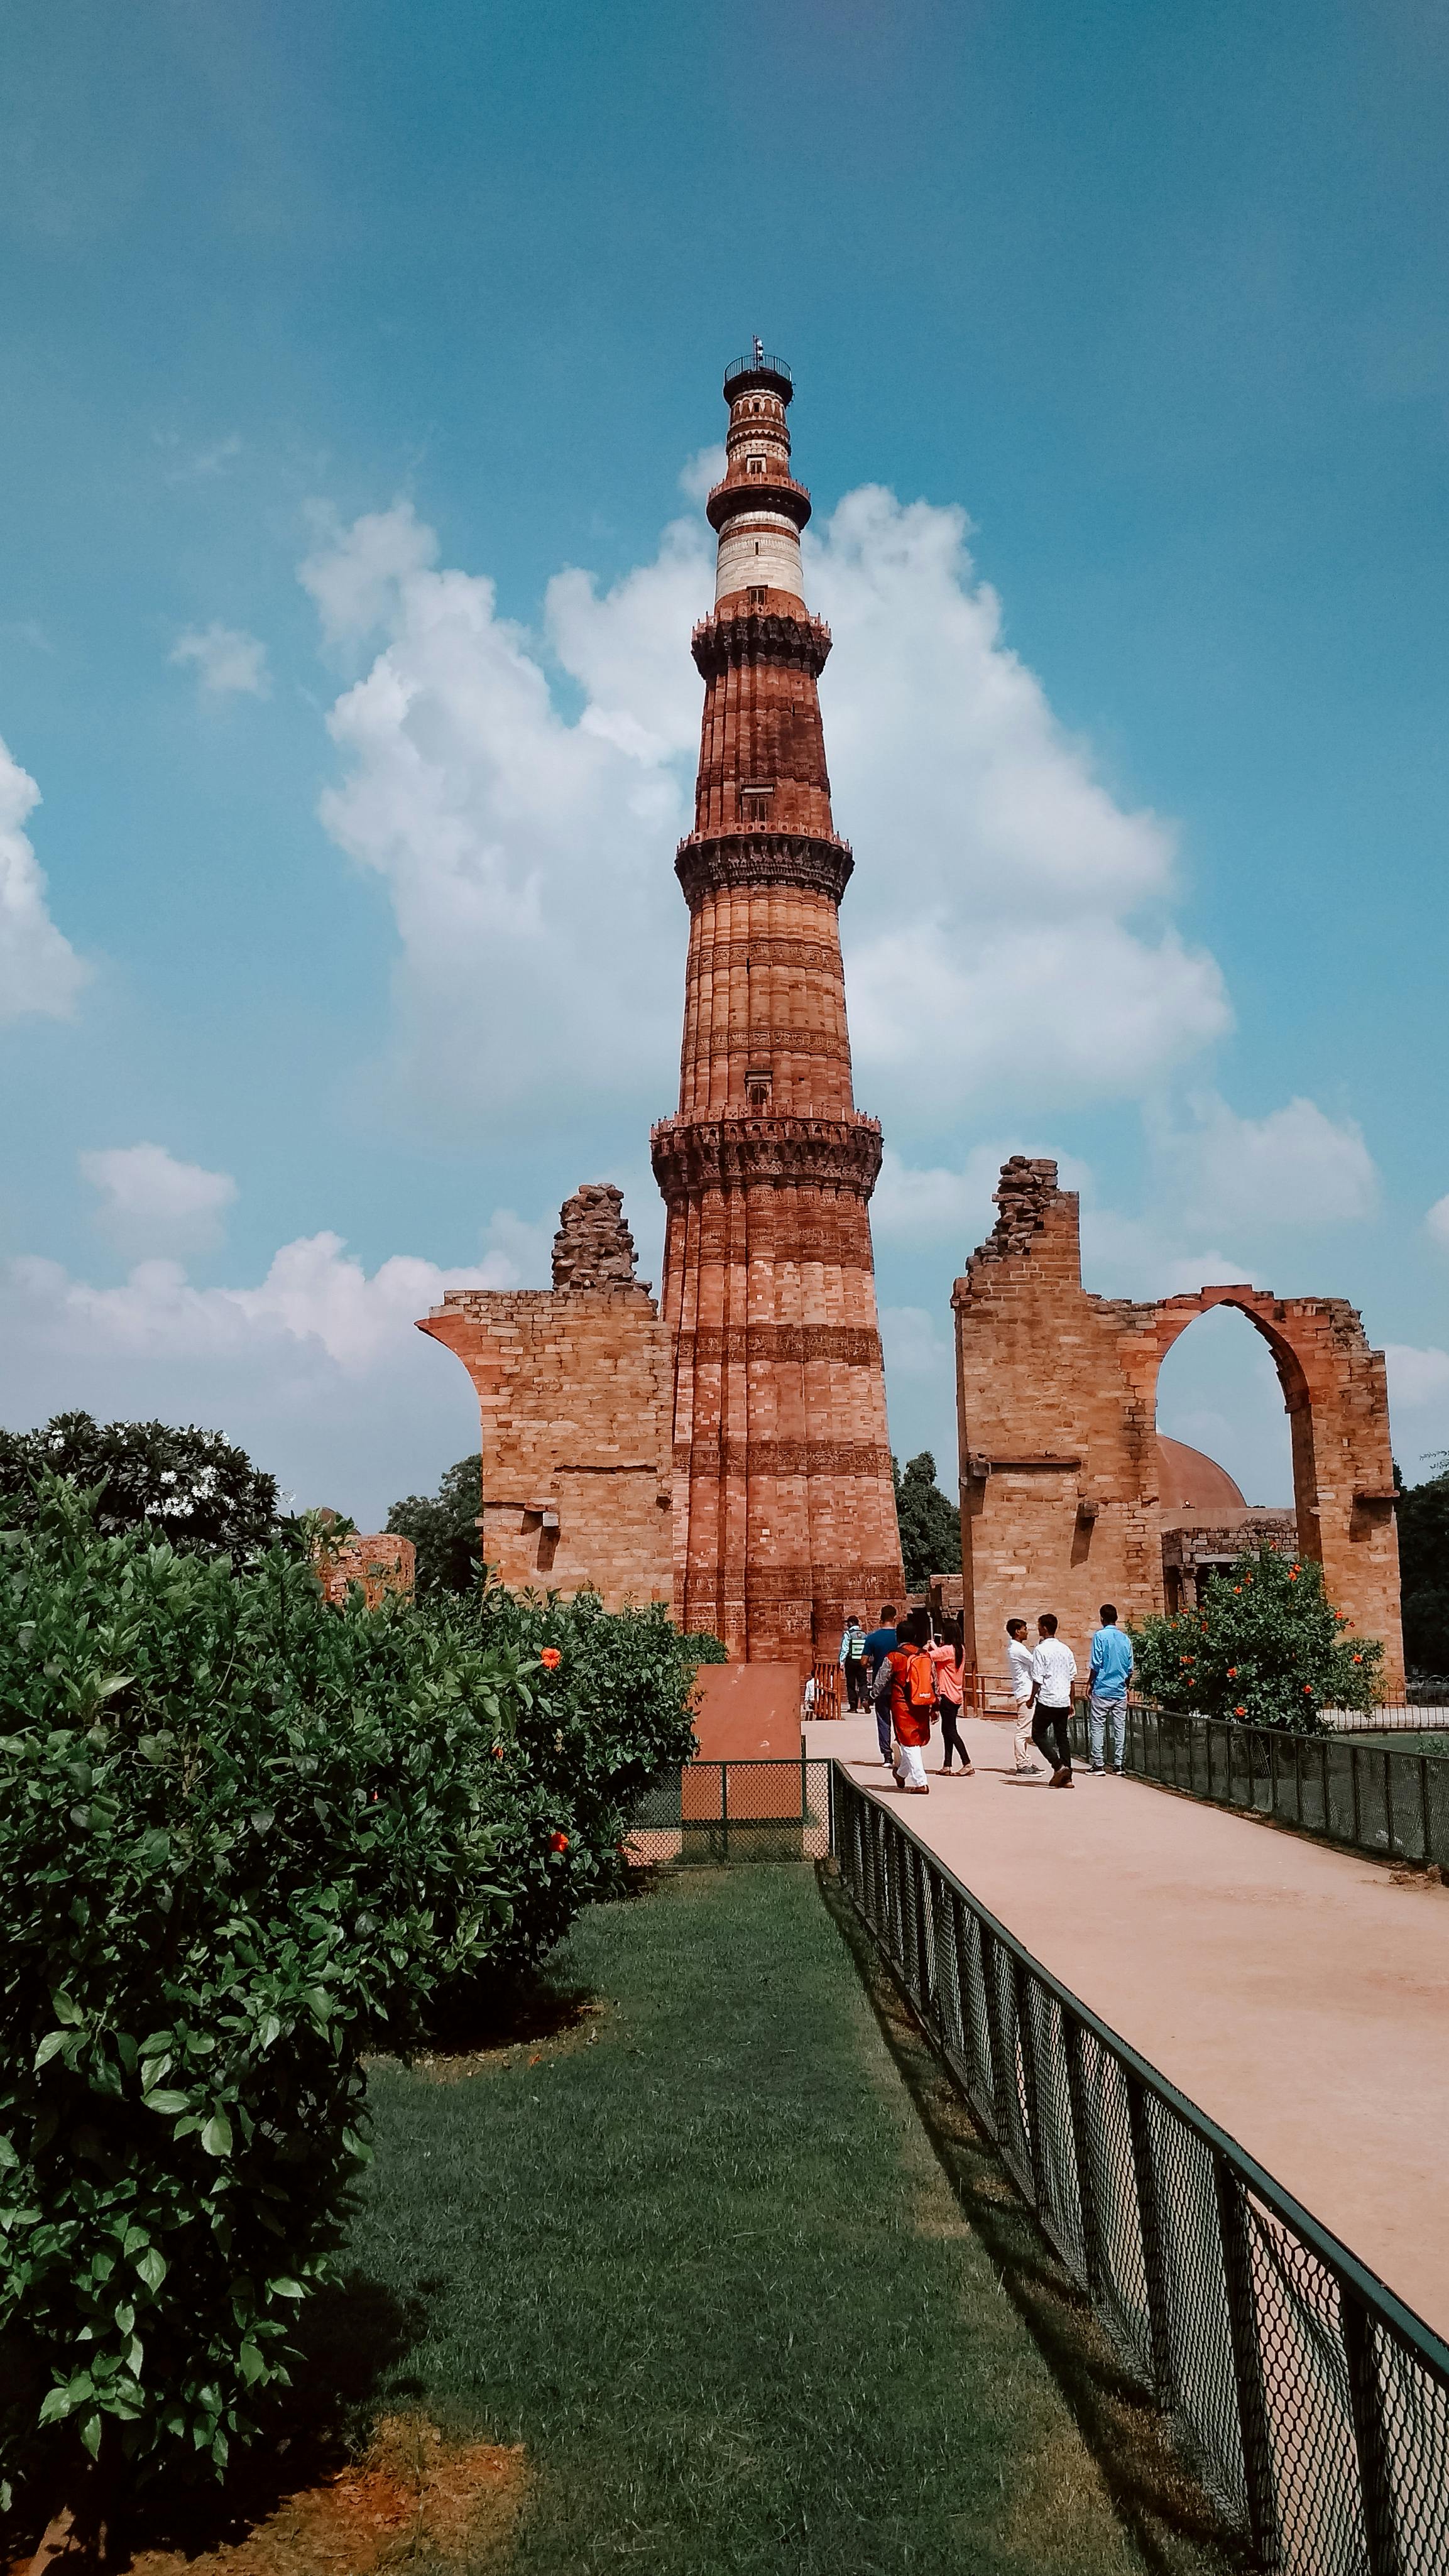 Qutub Minar Posters for Sale | Redbubble